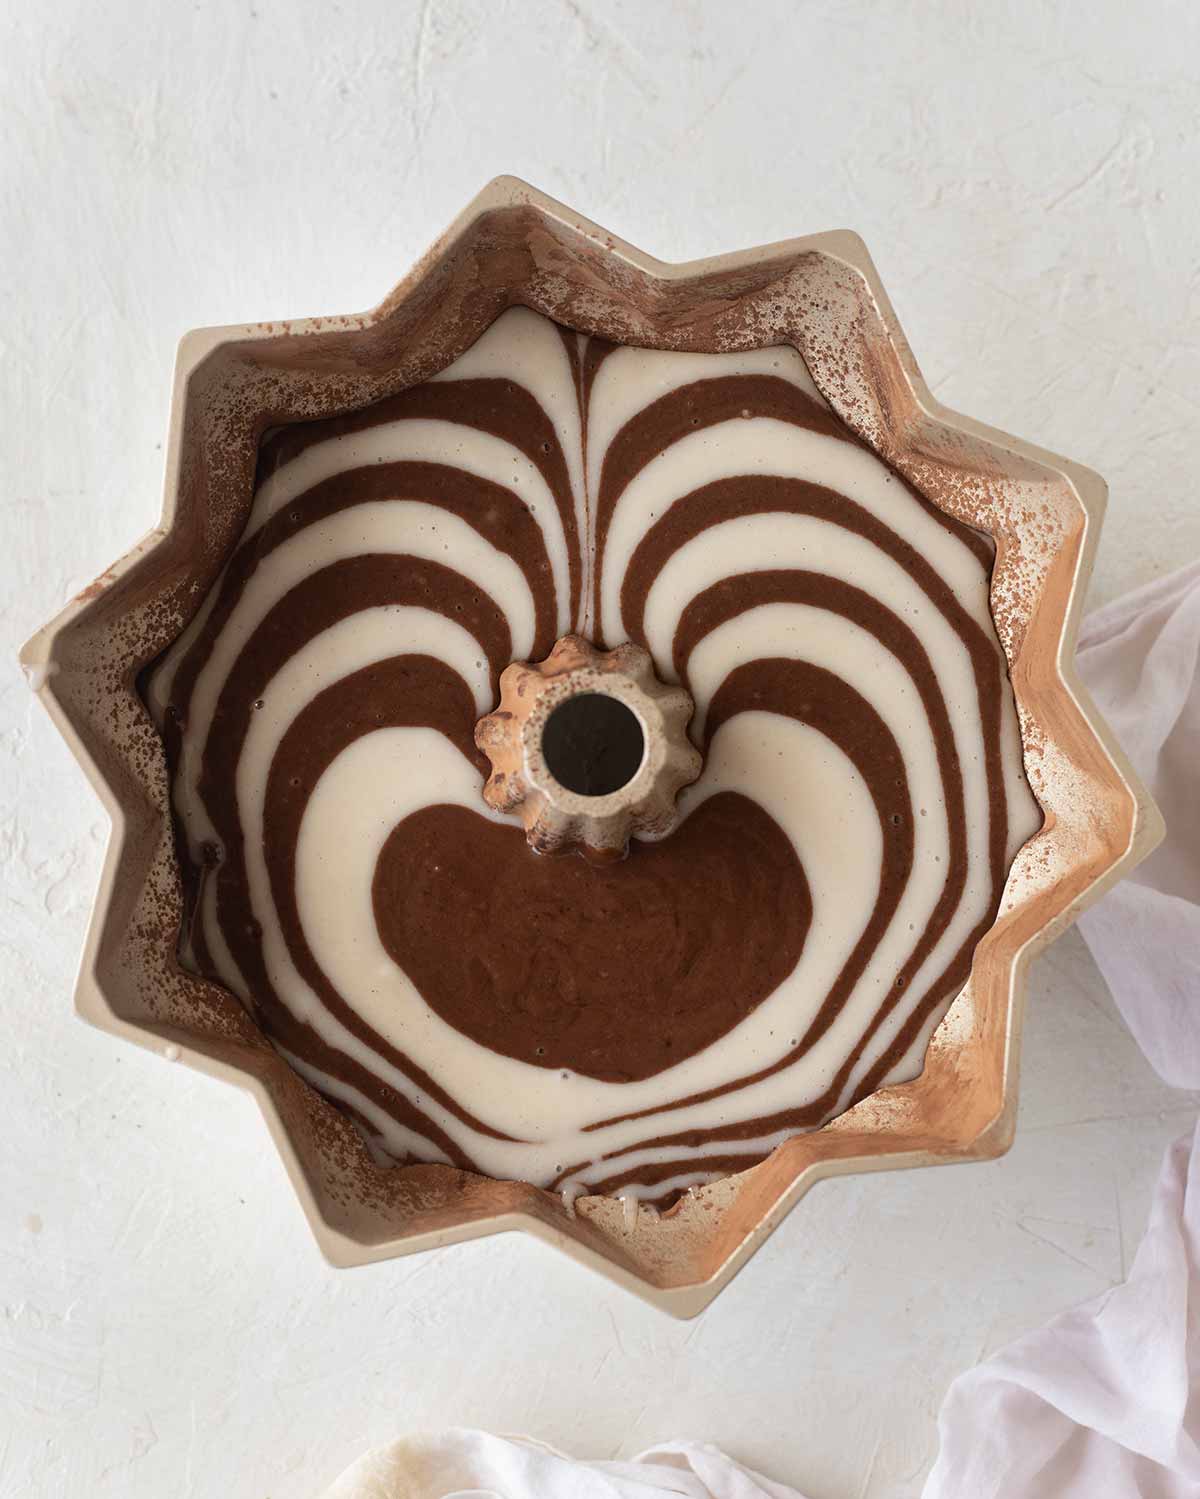 Bundt tin filled with chocolate and vanilla cake batter in zebra pattern.